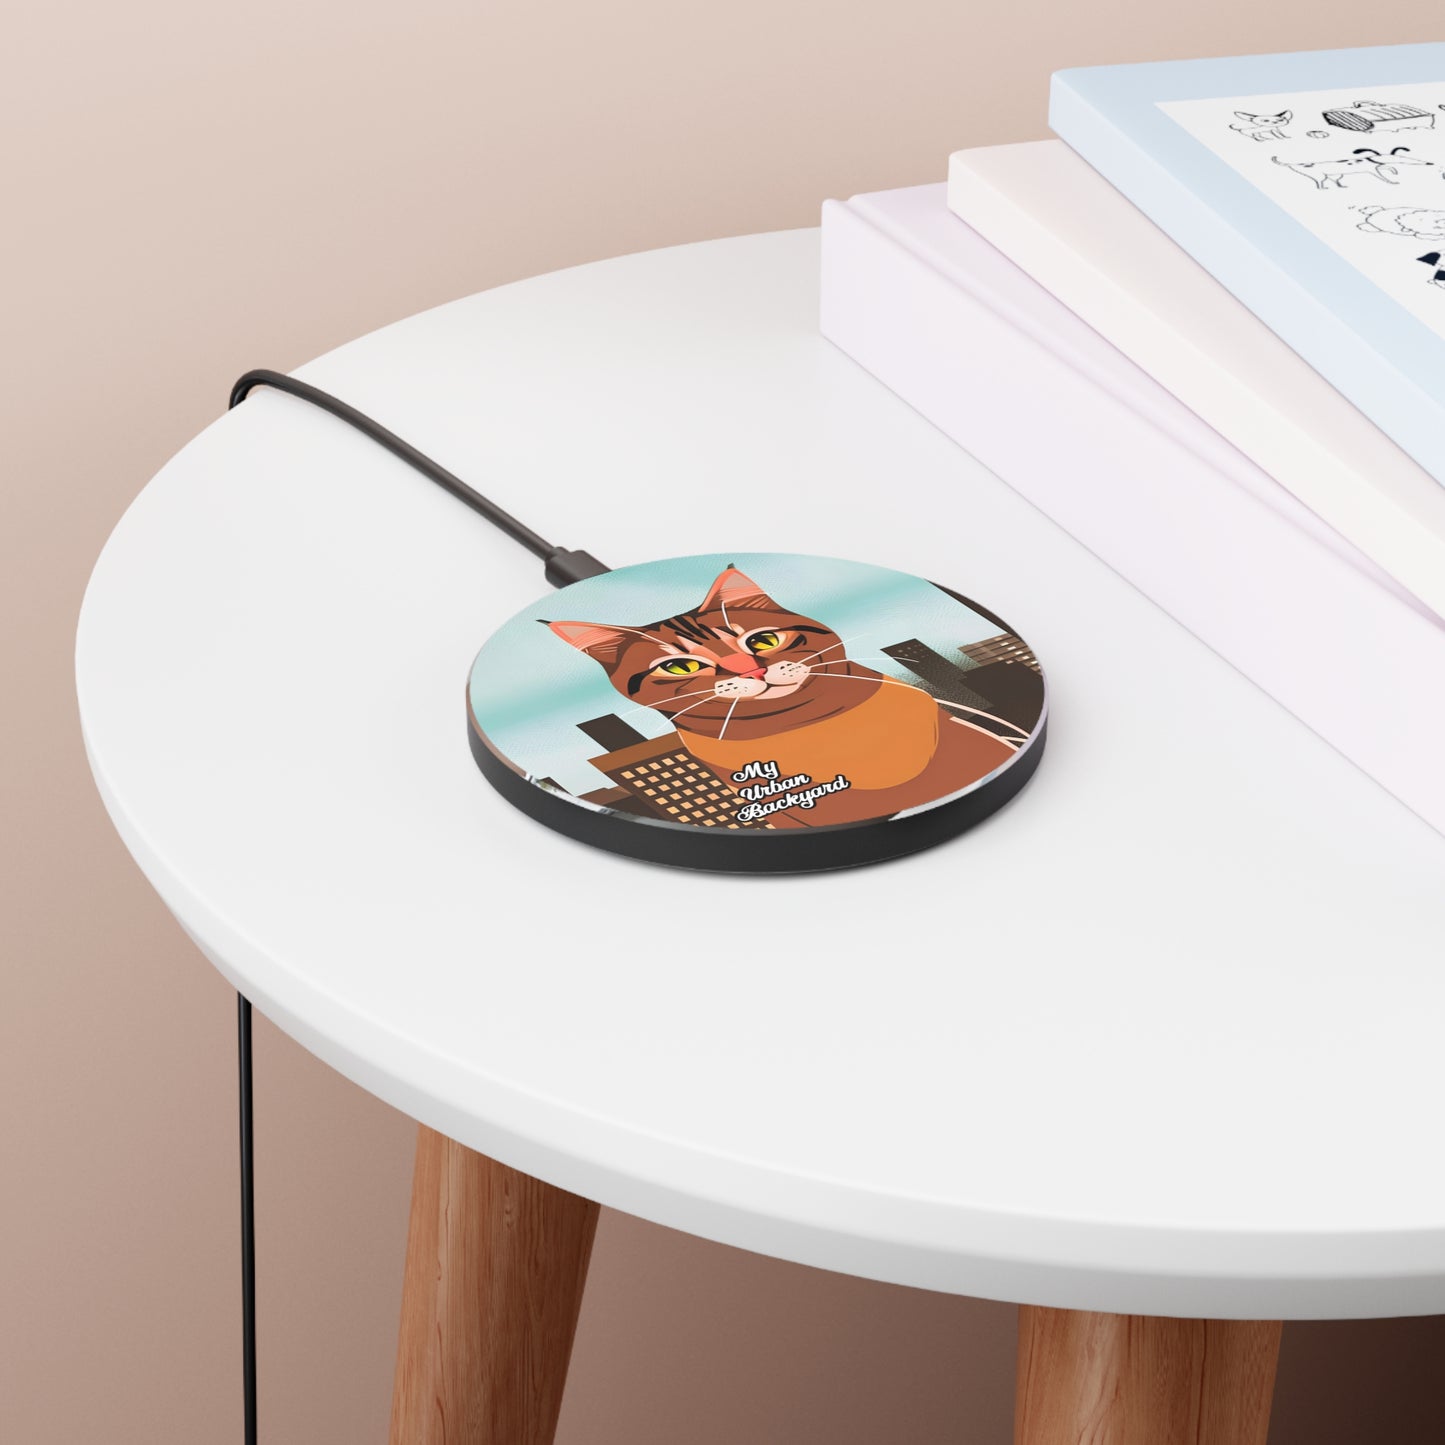 Urban Tabby Cat, 10W Wireless Charger for iPhone, Android, Earbuds